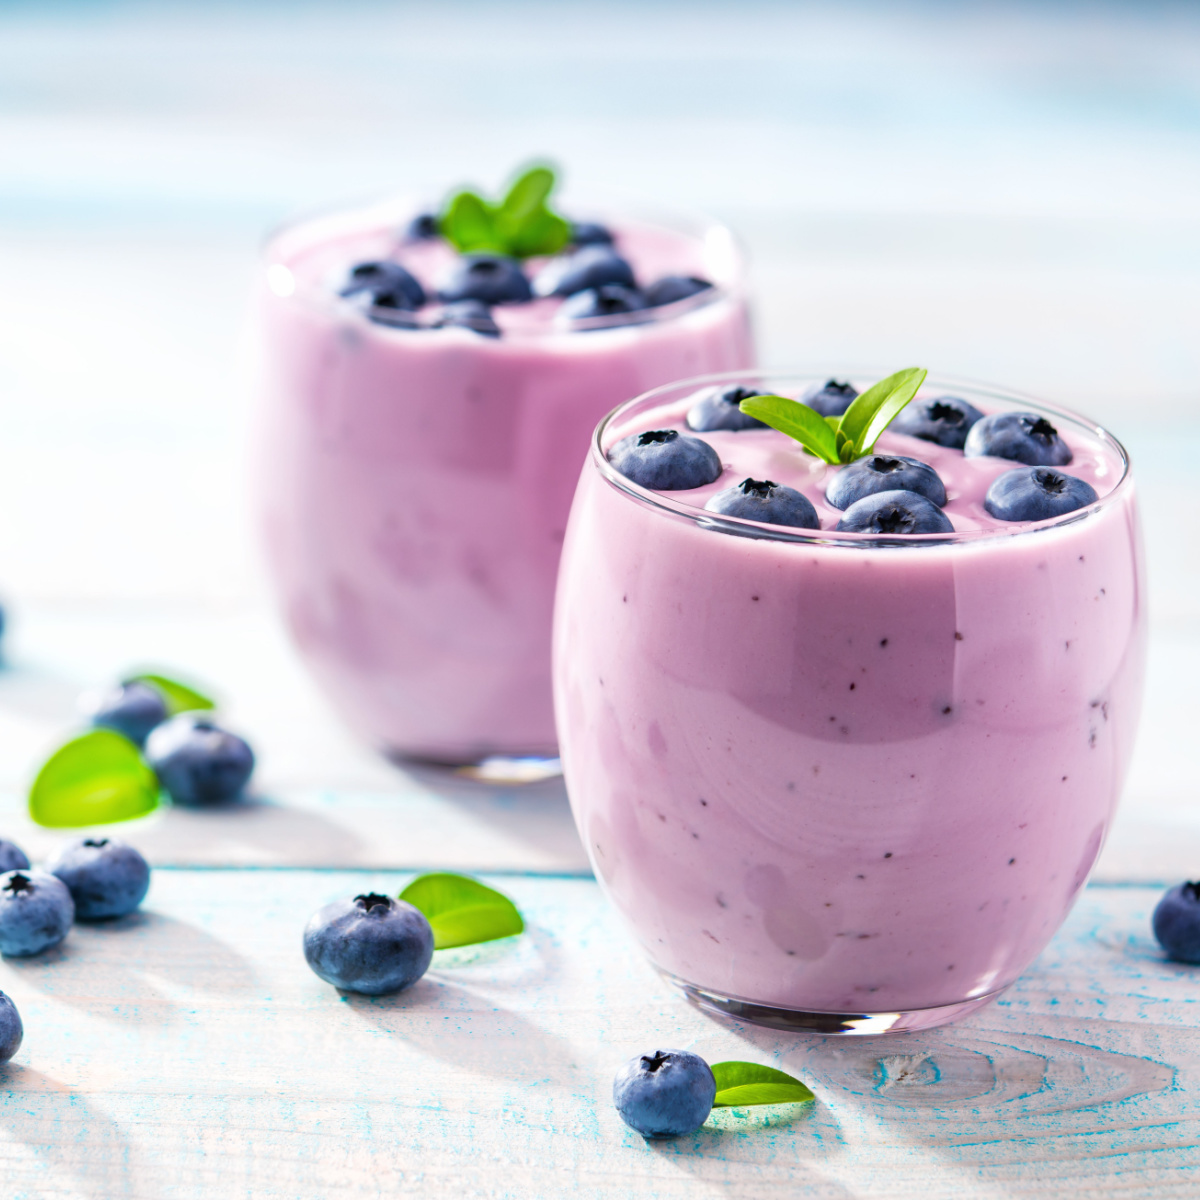 cups of blueberries and blueberry smoothie